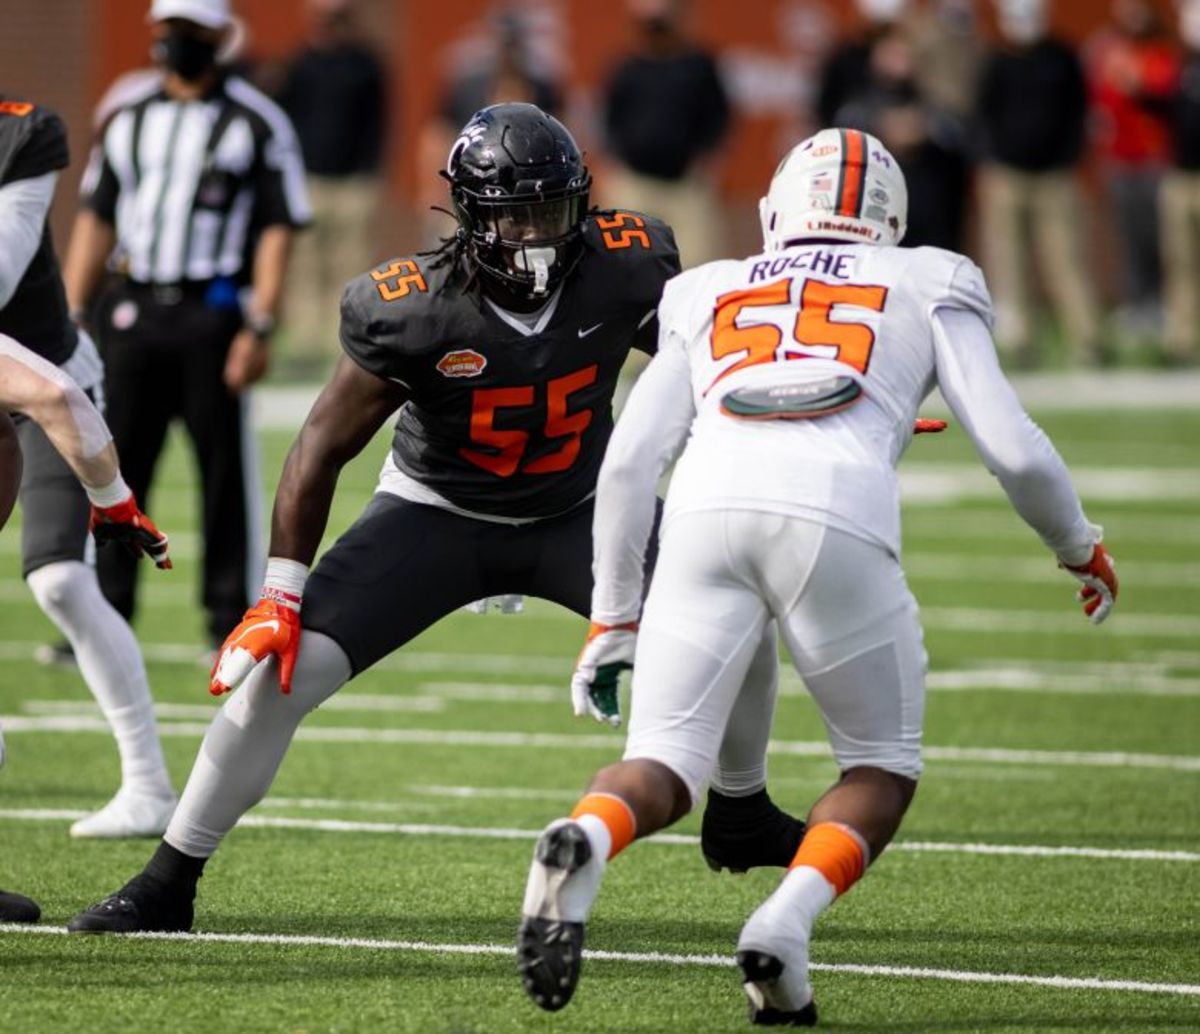 National offensive lineman James Hudson III of Cincinnati (55) faces off against American defensive lineman Quincy Roche of Miami (55) in the first half of the 2021 Senior Bowl at Hancock Whitney Stadium.